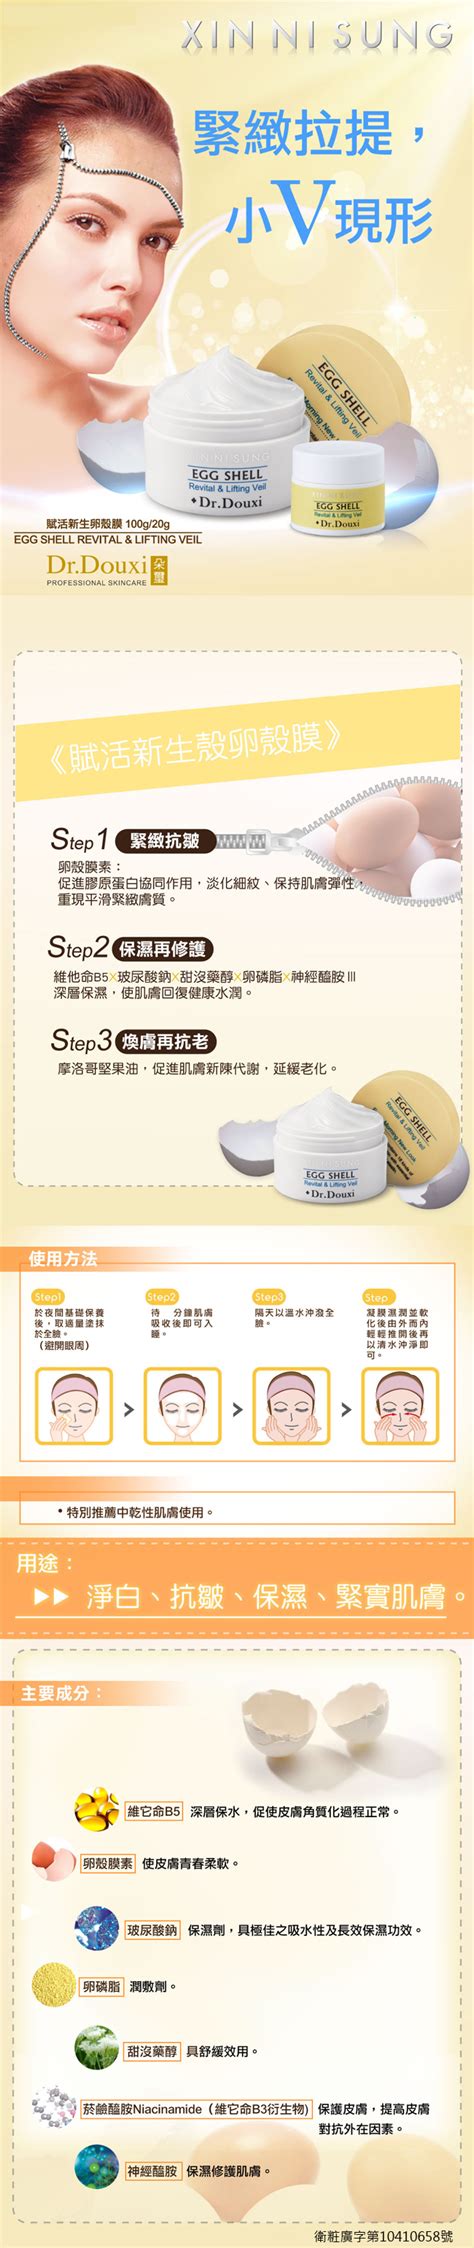 Dr.douxi has been featured in many taiwanese tv shows/dramas/movies and the products are highly recommended by dermatologist and celebrities. Dr. Douxi Xin Ni Sung Egg Shell Revital & Lifting Veil ...